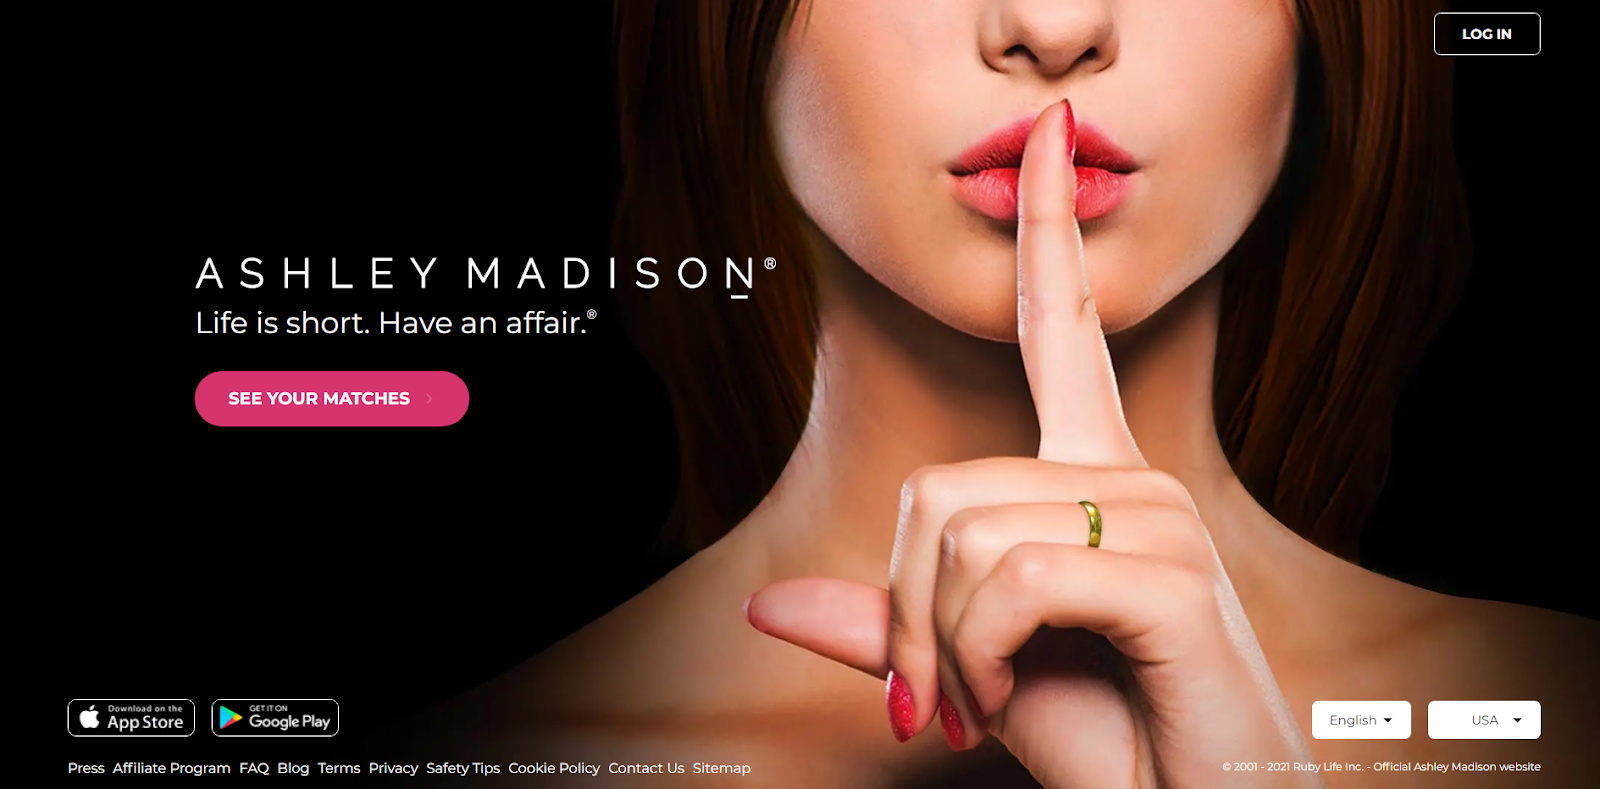 Where to meet singles not online getting laid with ashley madison.